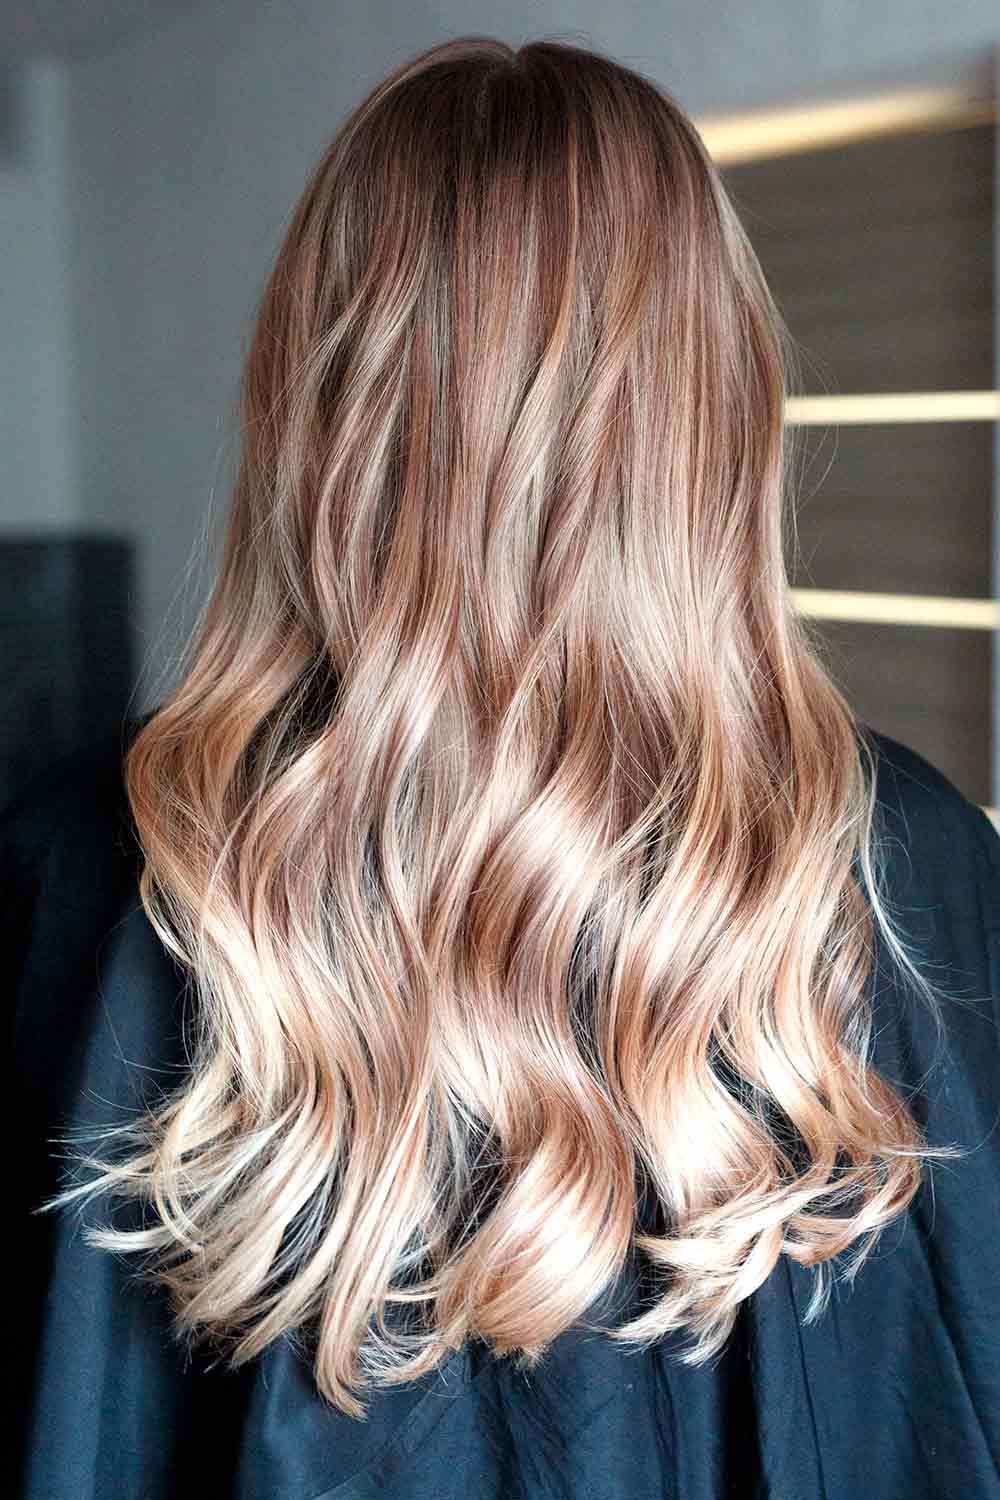 Blonde Ombre For Long Wavy Hair #lovehairstyles #fallhaircolors #longhairstyle